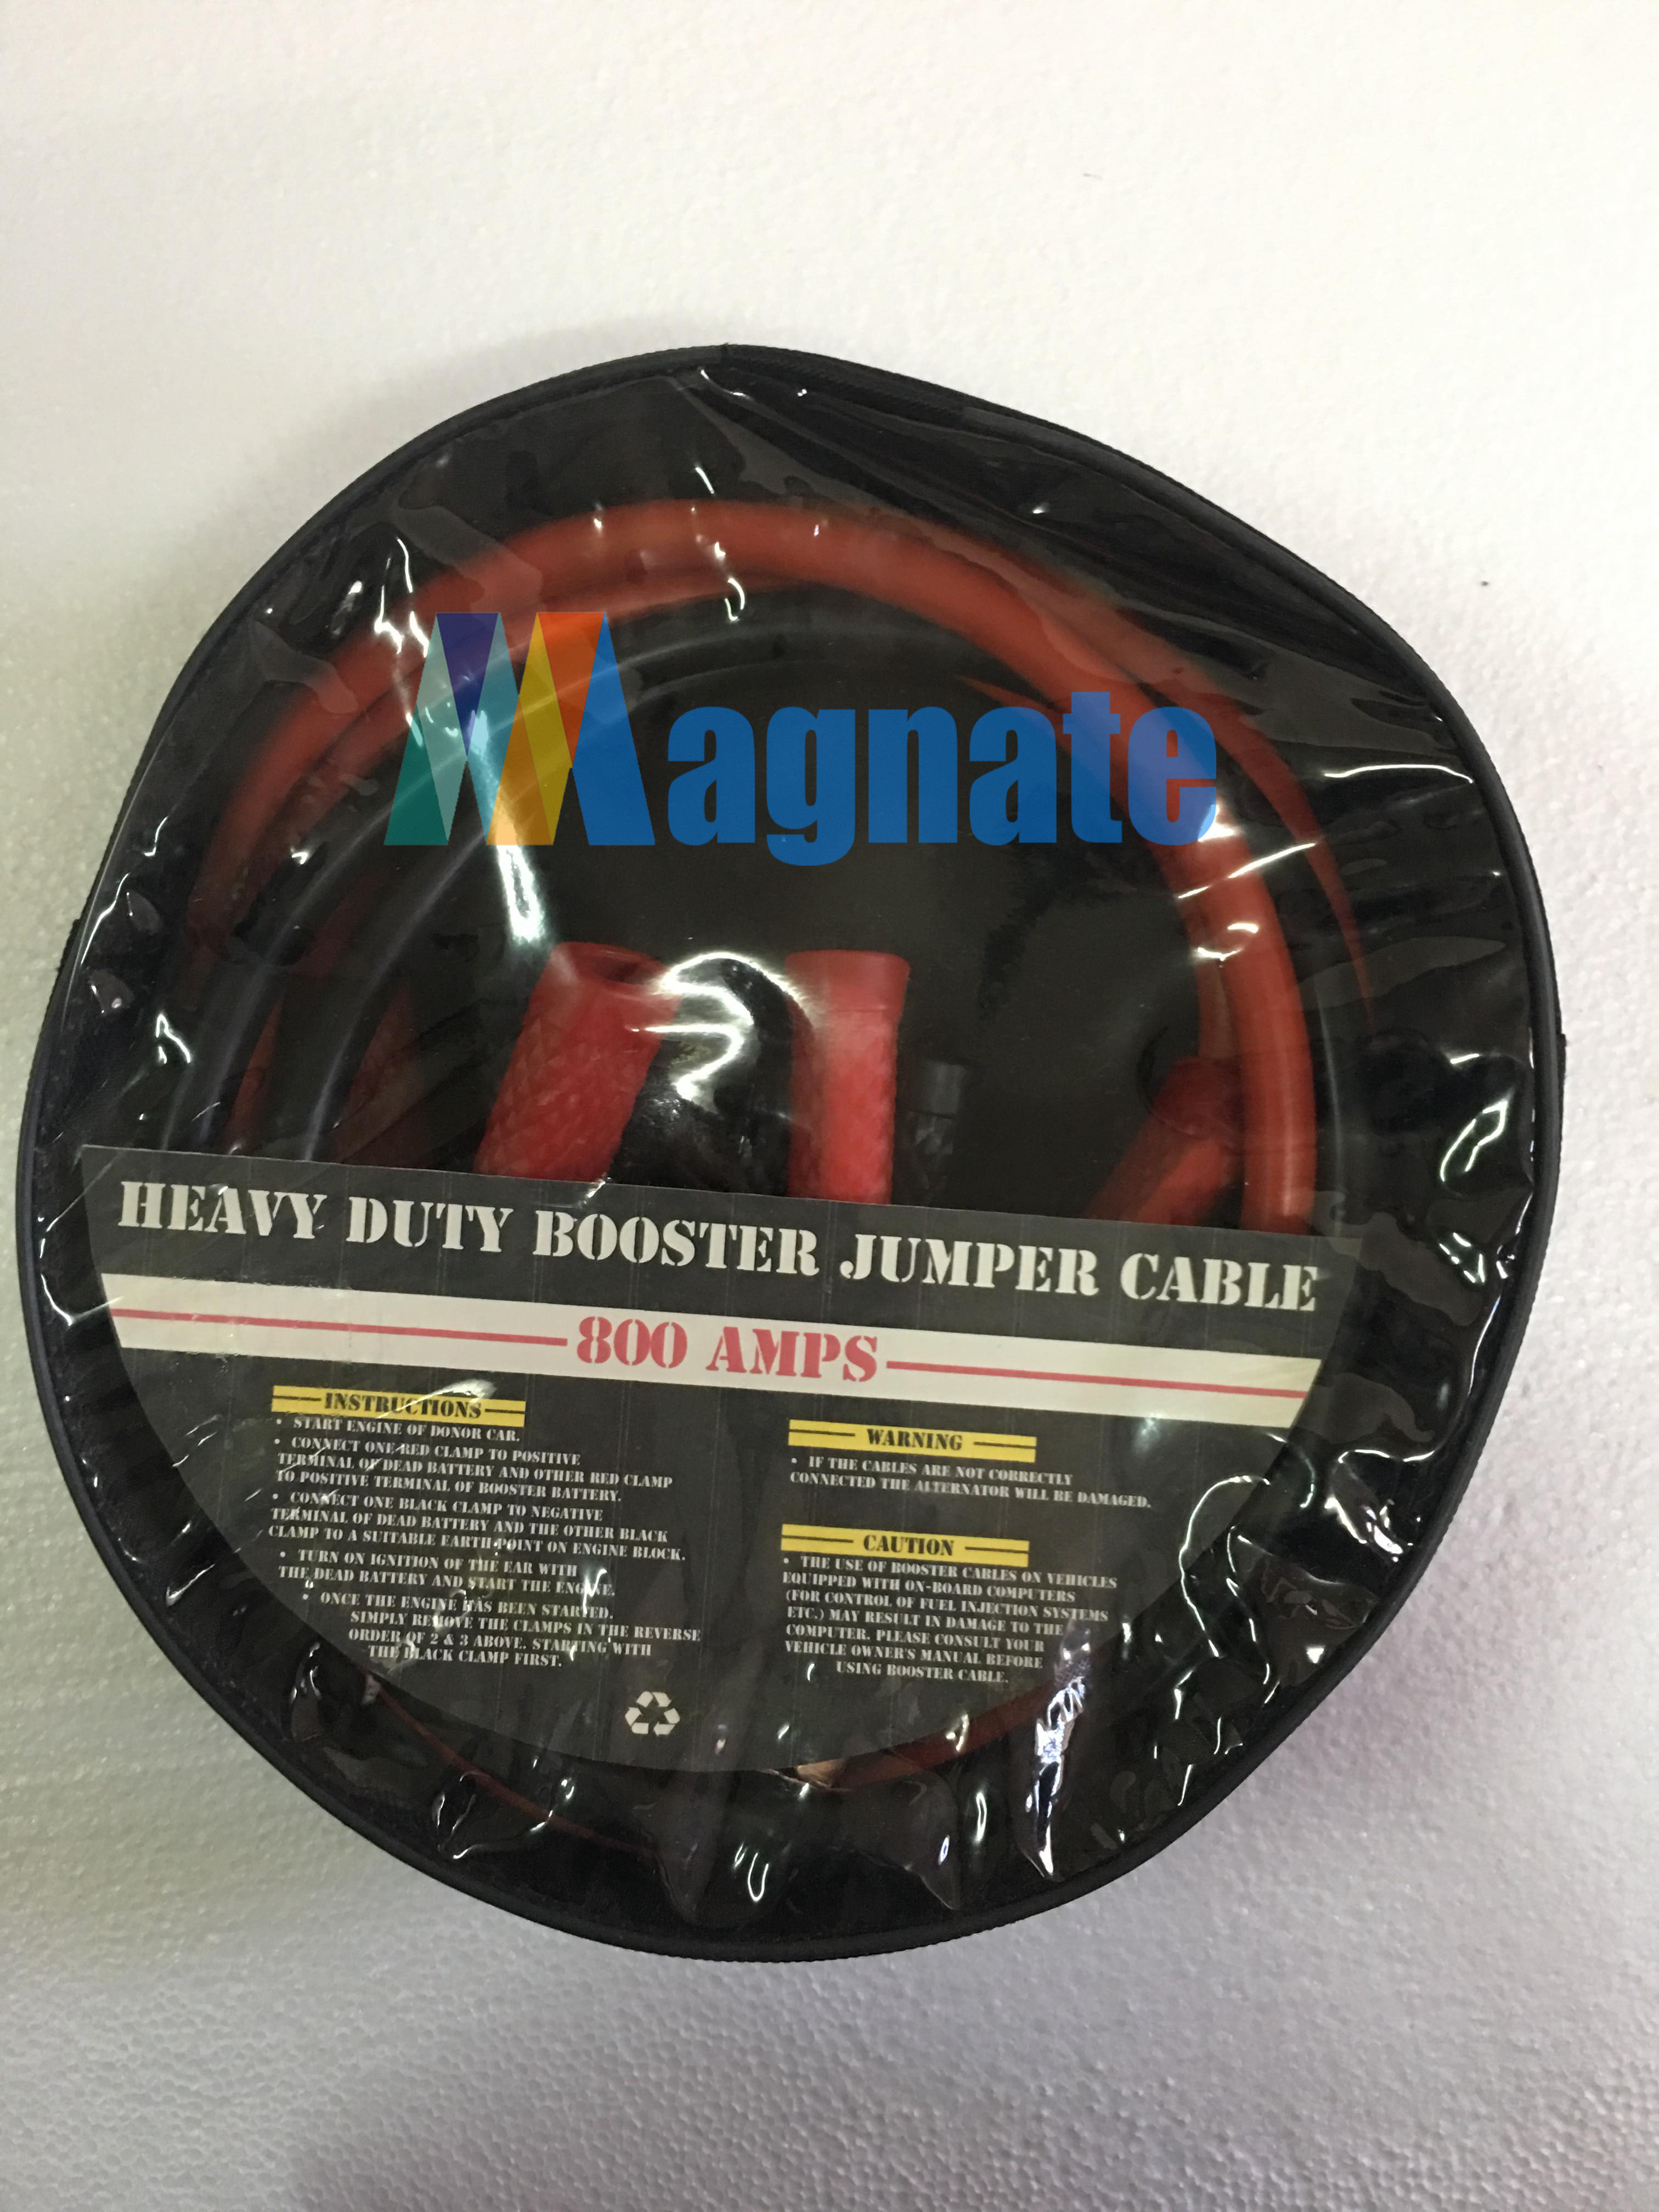 Heavy Duty Booster Jumper Cable 800 AMPS